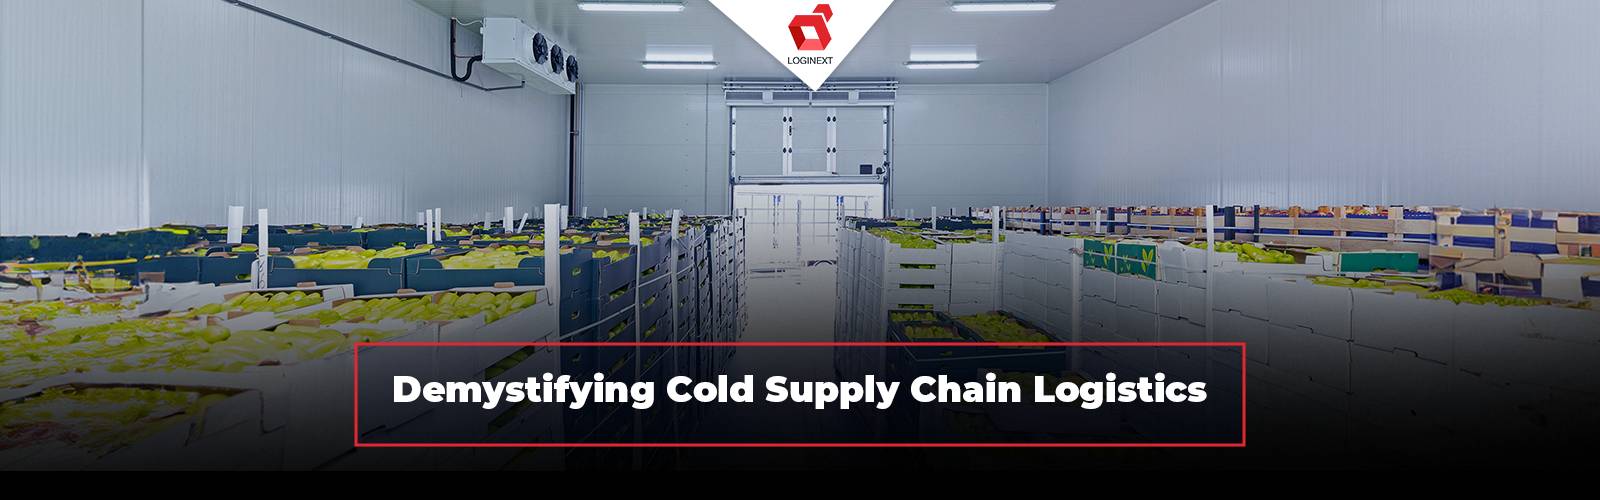 Demystifying Cold Supply Chain Logistics With the best TMS Solution